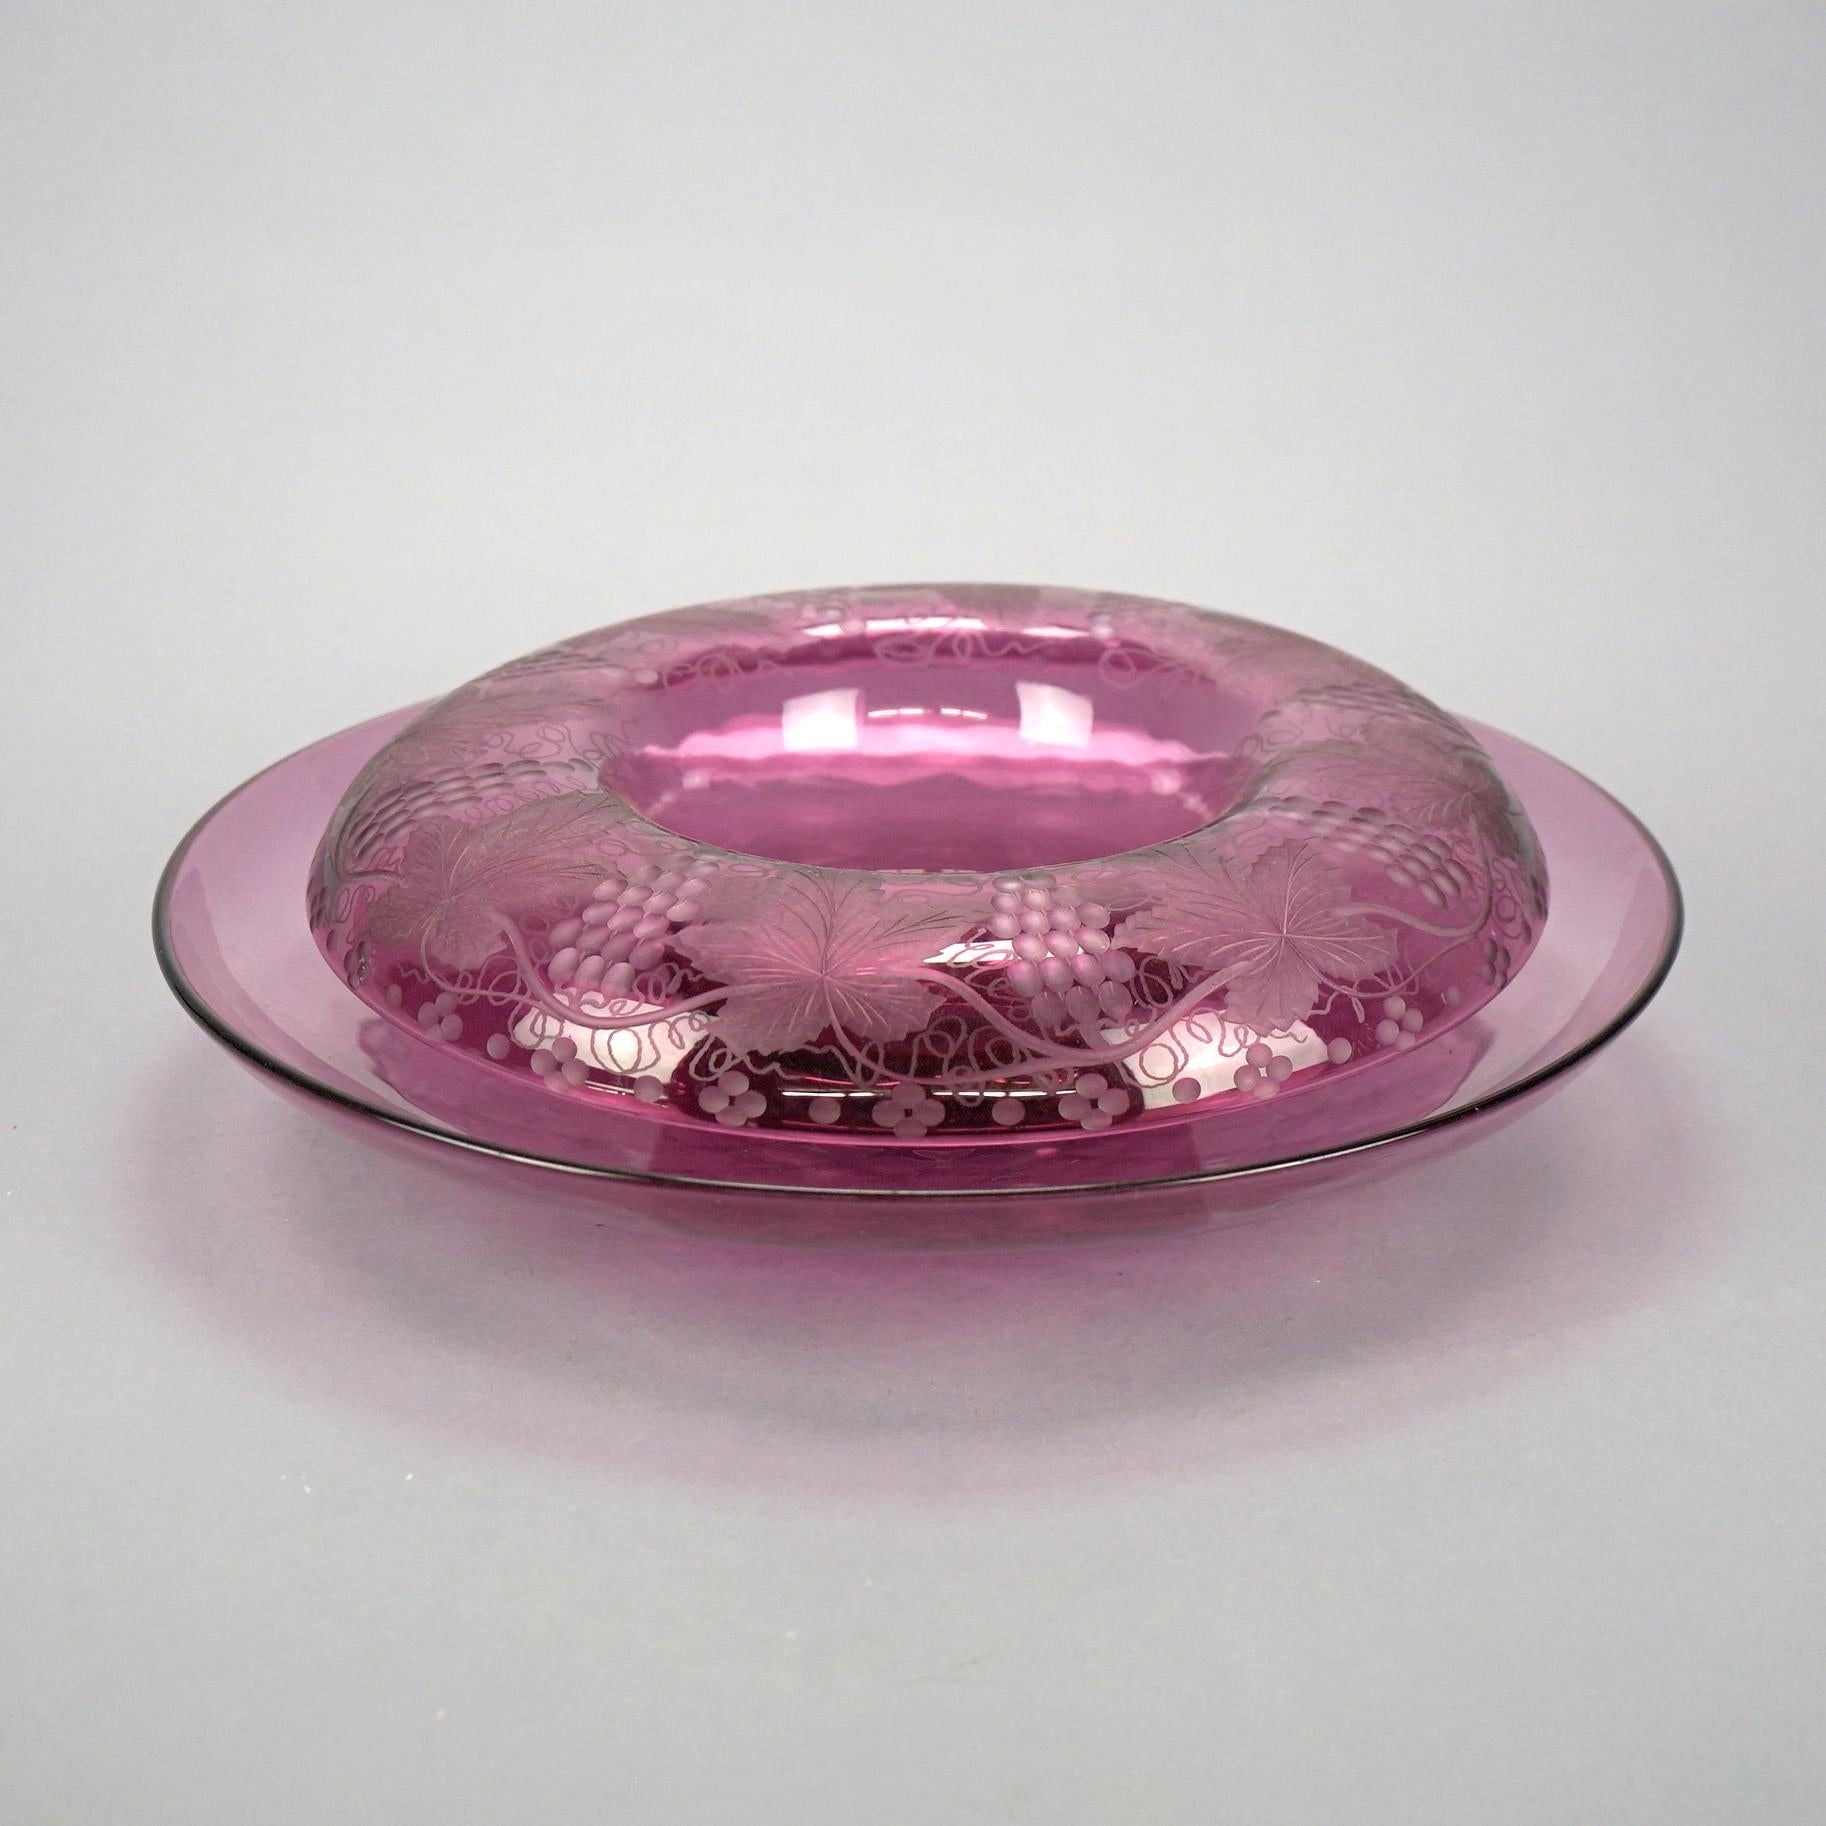 An antique Pairpoint Elegant glass center bowl and liner offers etched grape and leaf design, c1920

Measures- underplate 2.5'' H x 16.5'' W x 16.5'' D; bowl 3.5'' H x 13.5'' W x 13.5'' D.